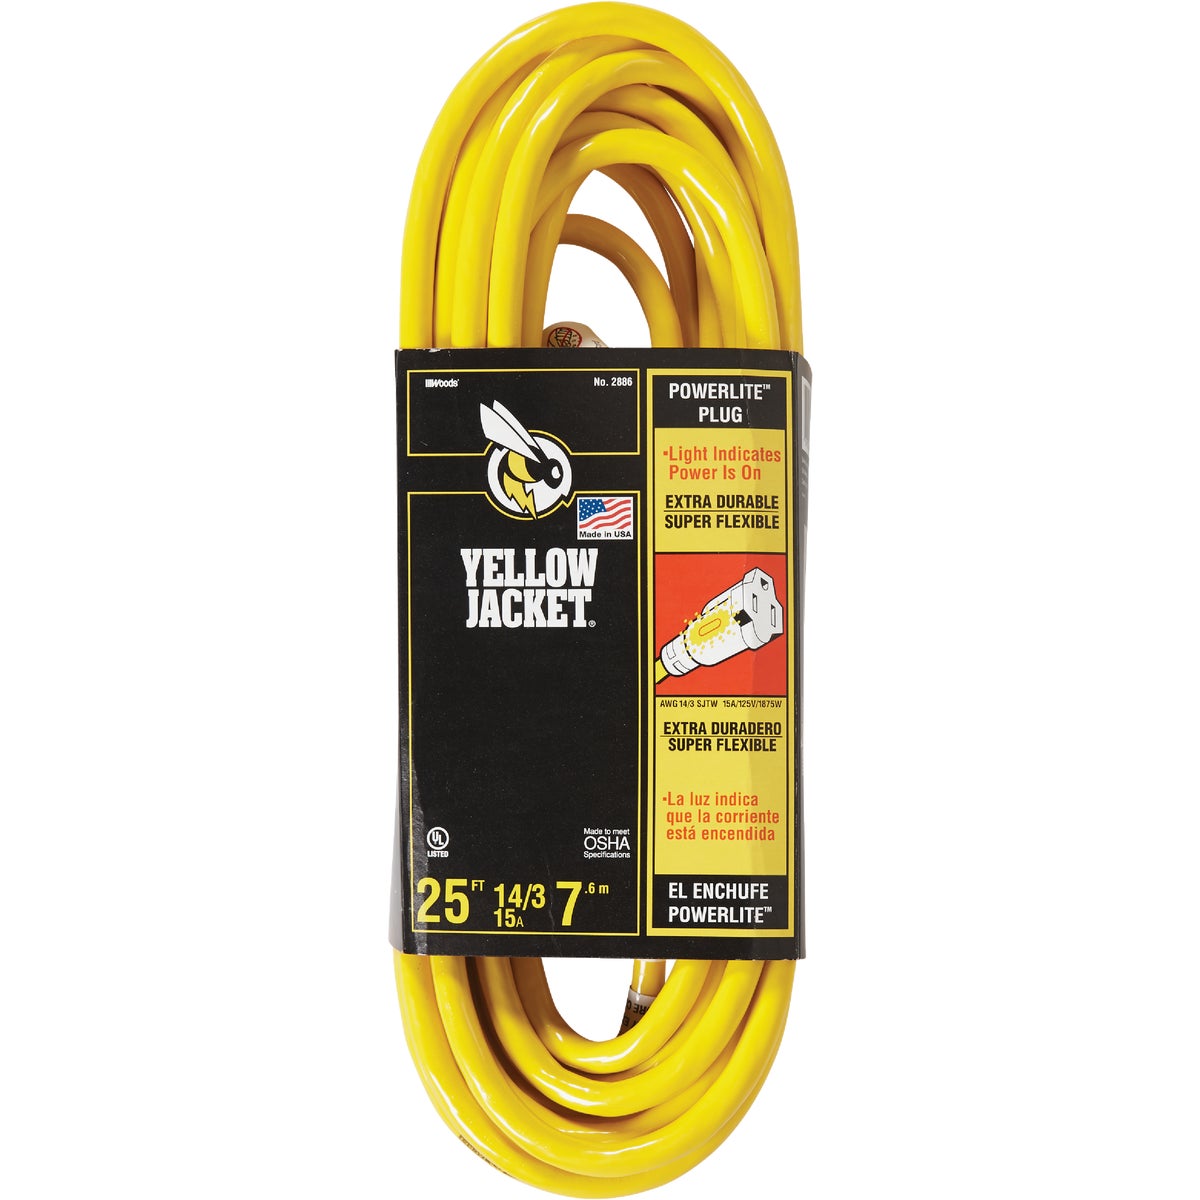 Item 529194, Durable extension cord with lighted PowerLite plug.